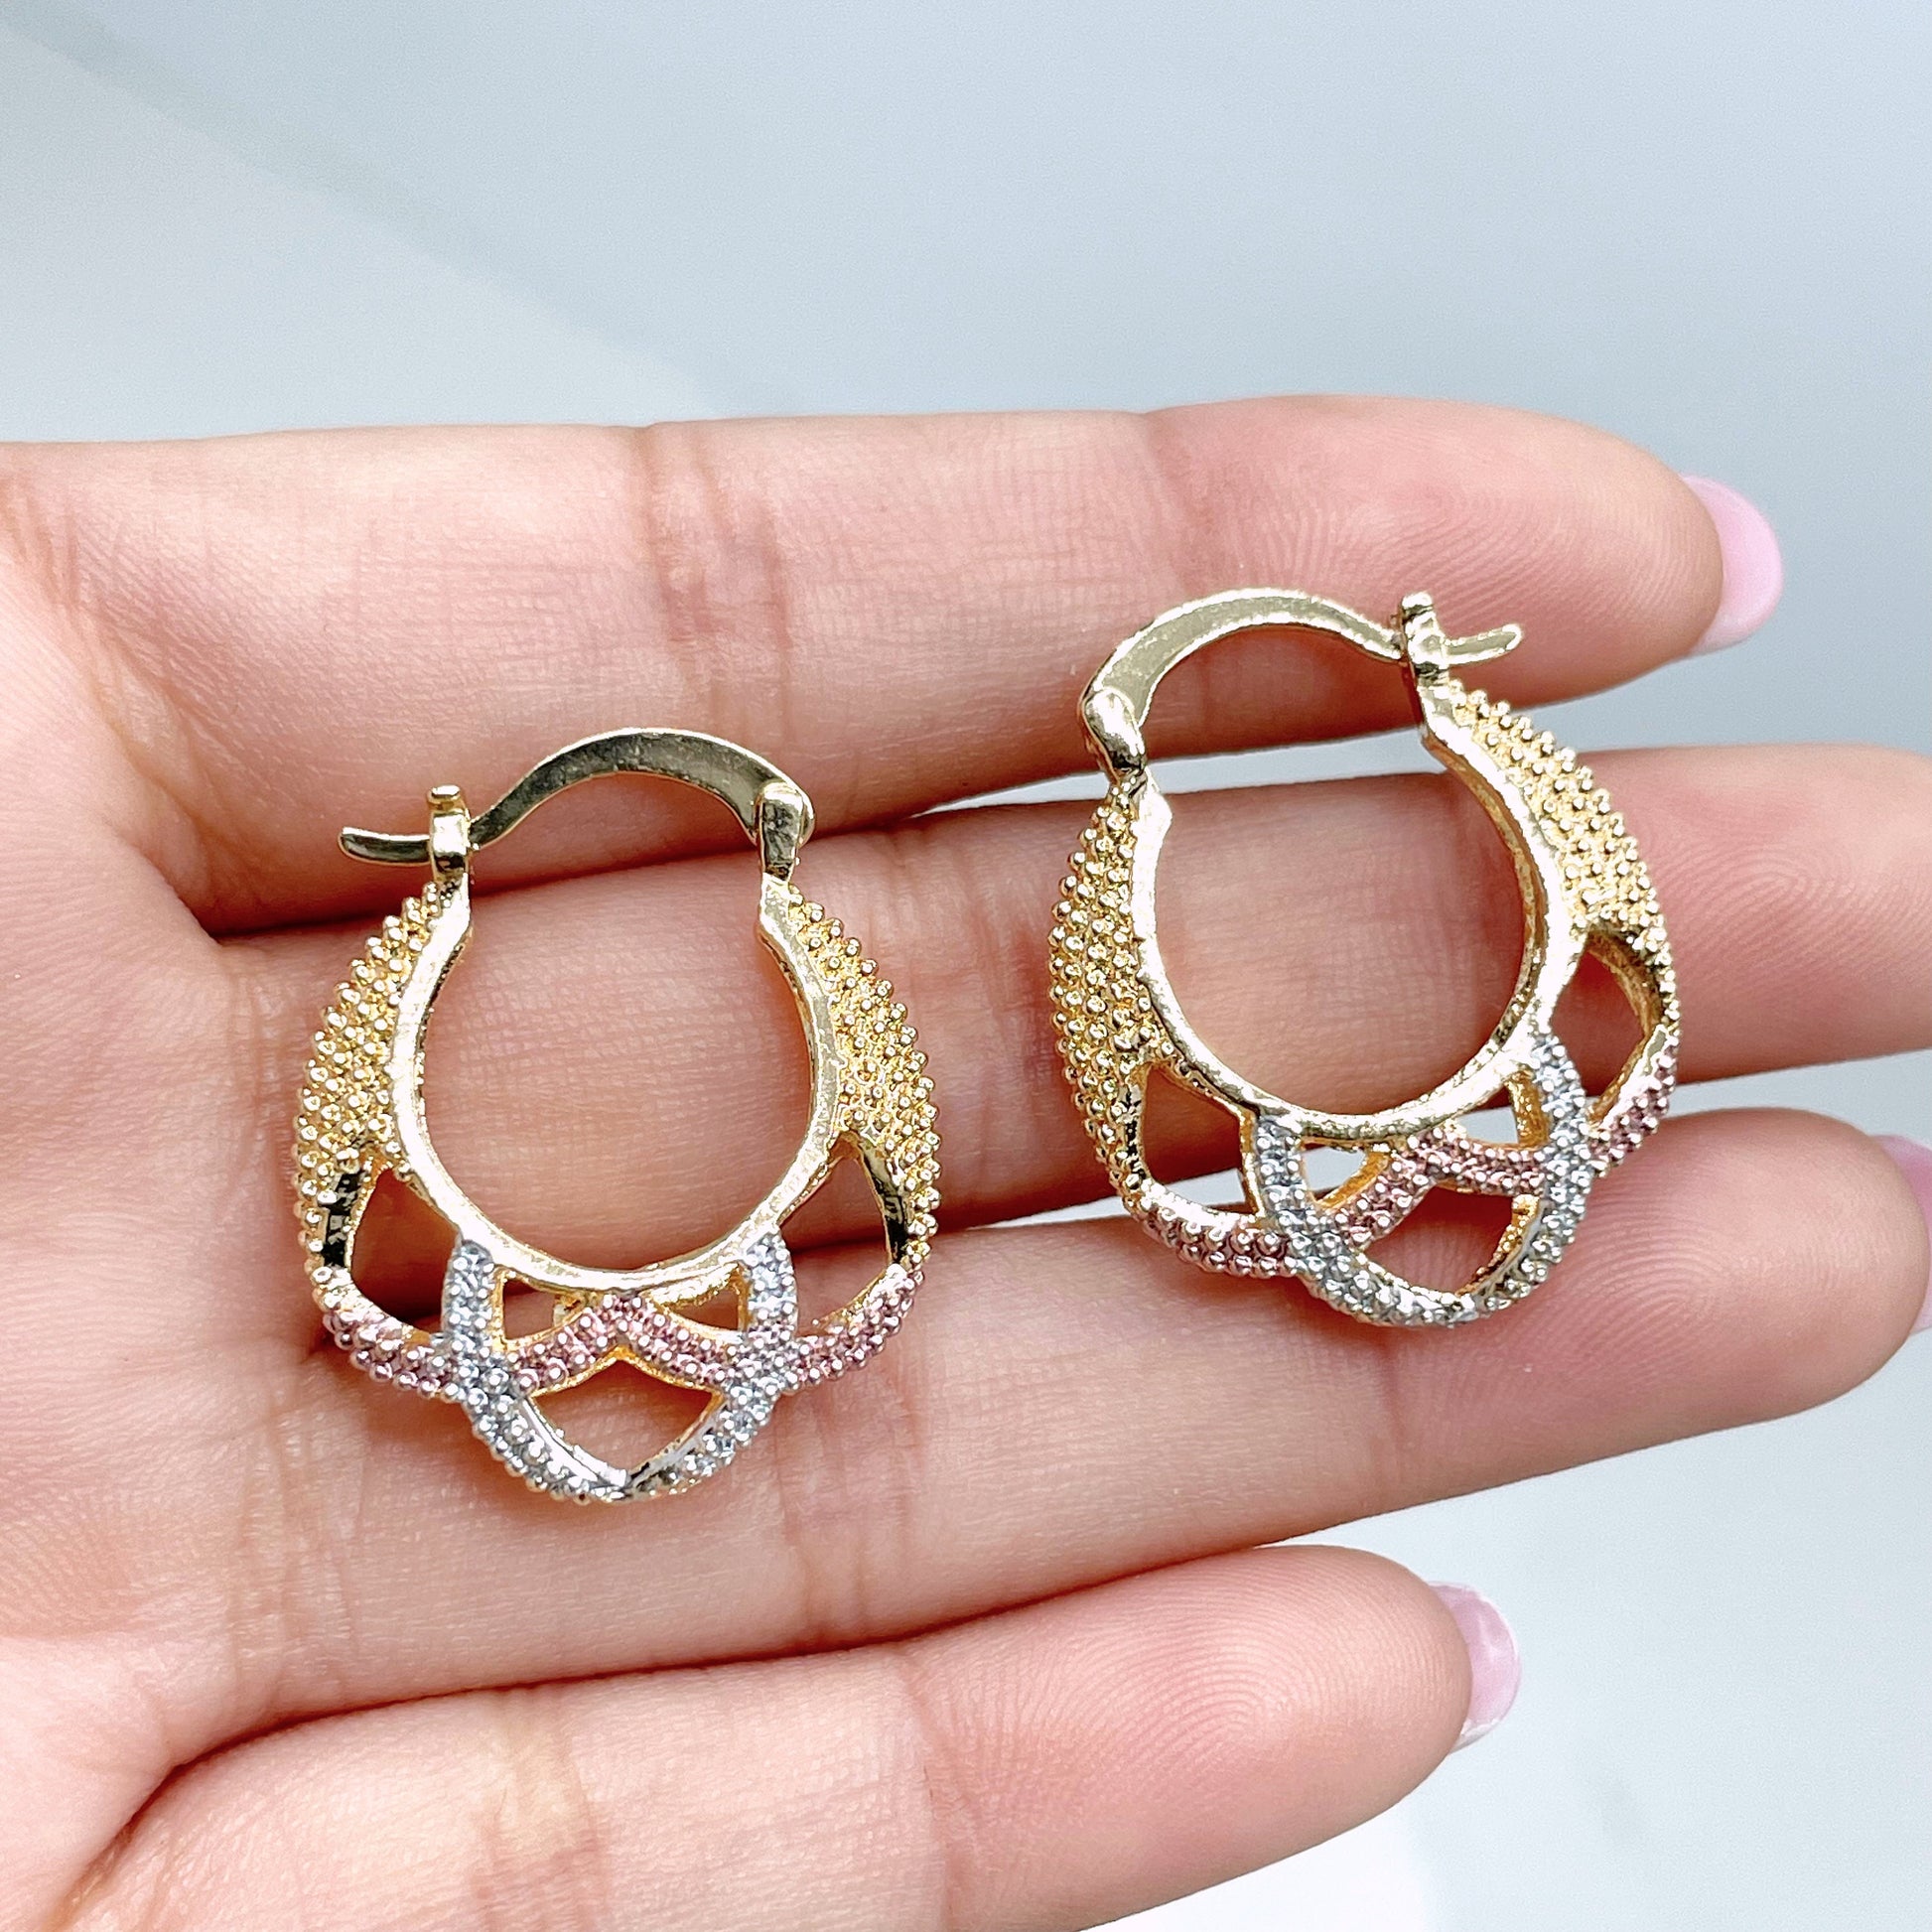 18k Gold Filled Tree Tone, Thee Color 22mm Basket Design Hoop Earrings, 6mm Thickness, Wholesale Jewelry Making Supplies